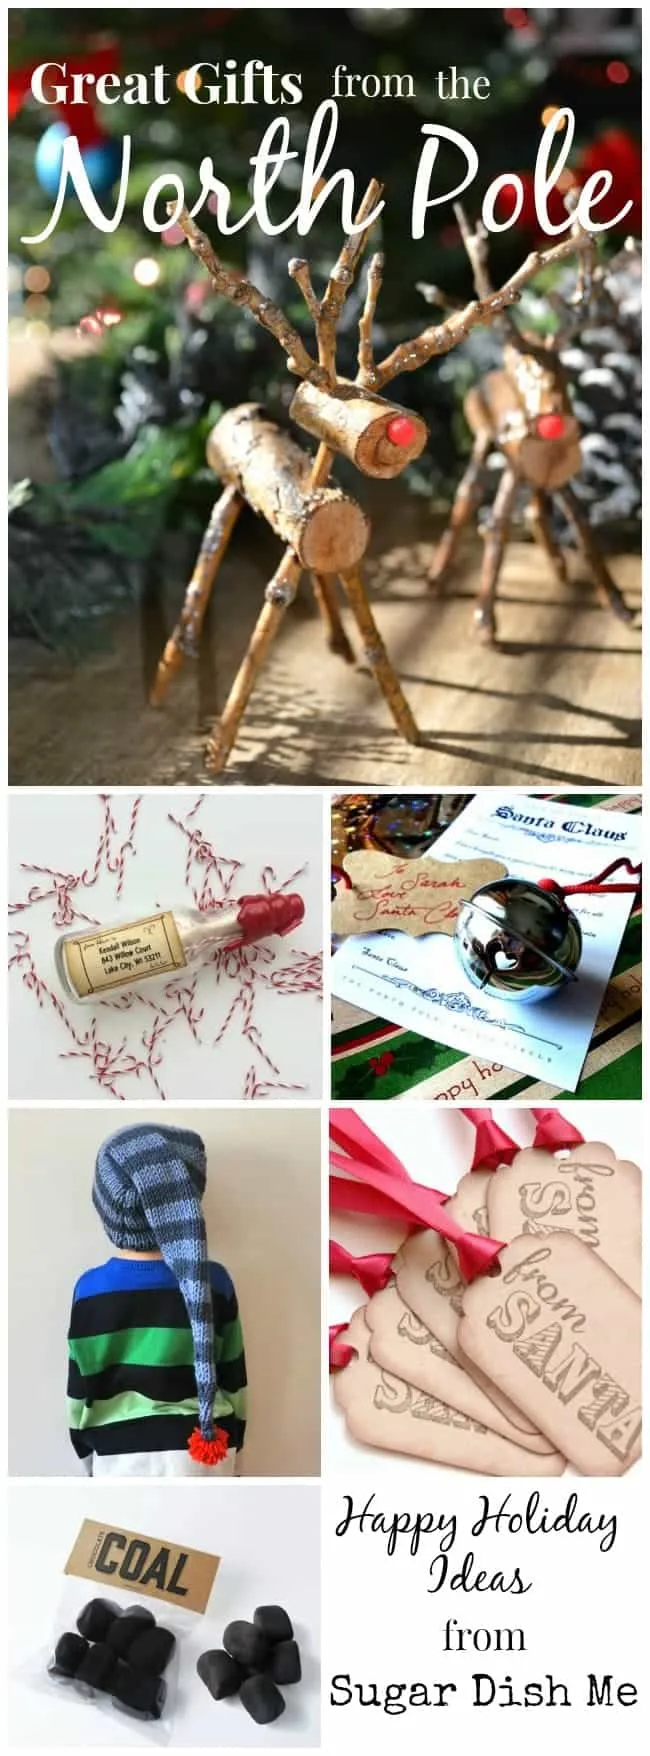 Great Gift Ideas from The North Pole